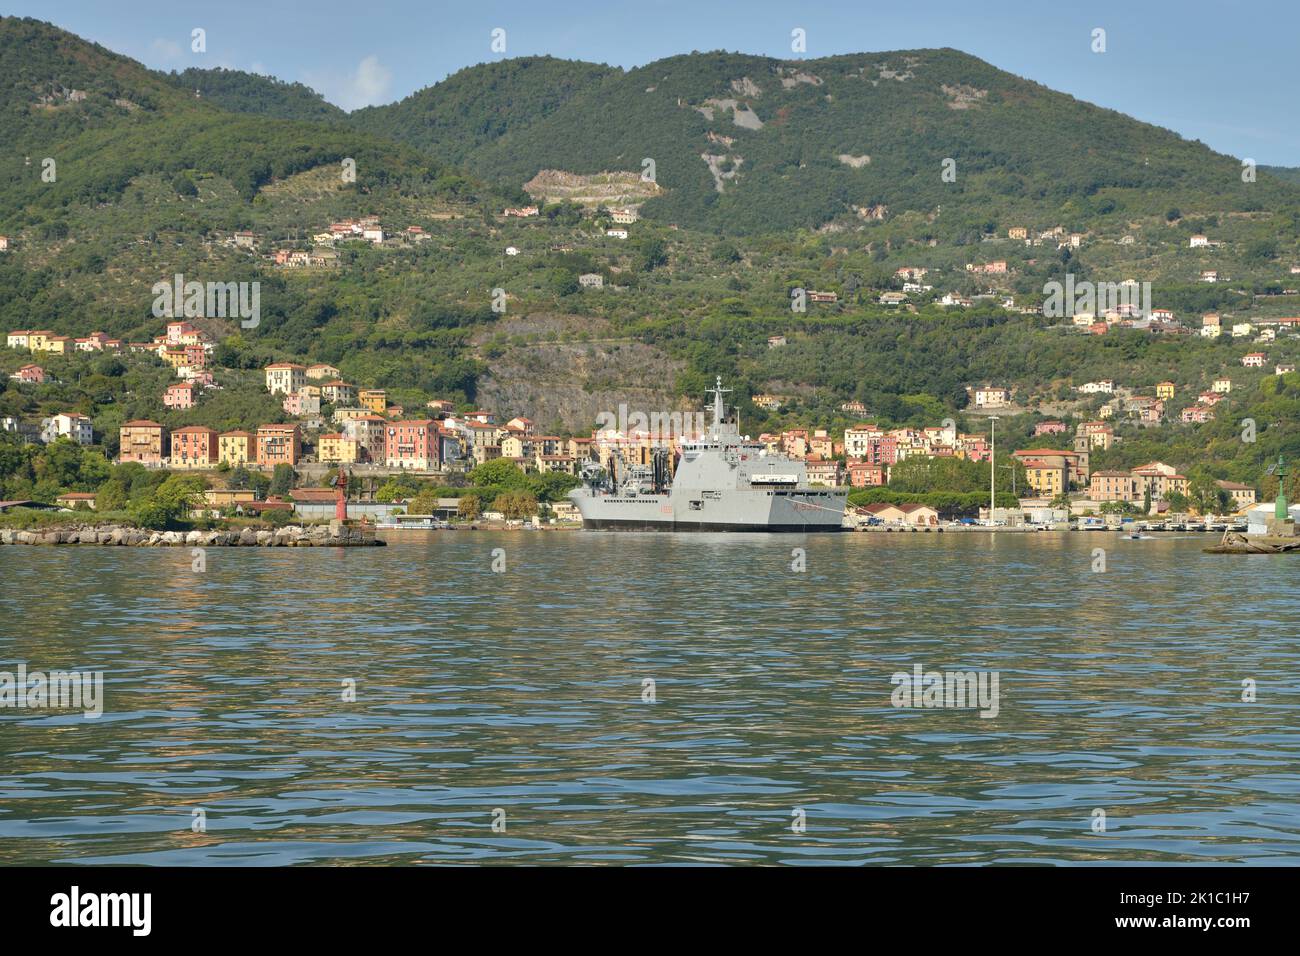 The Vulcano (A 5335) auxiliary naval vessel for logistic support ship (LSS), docked in La Spezia Port - Italy Stock Photo